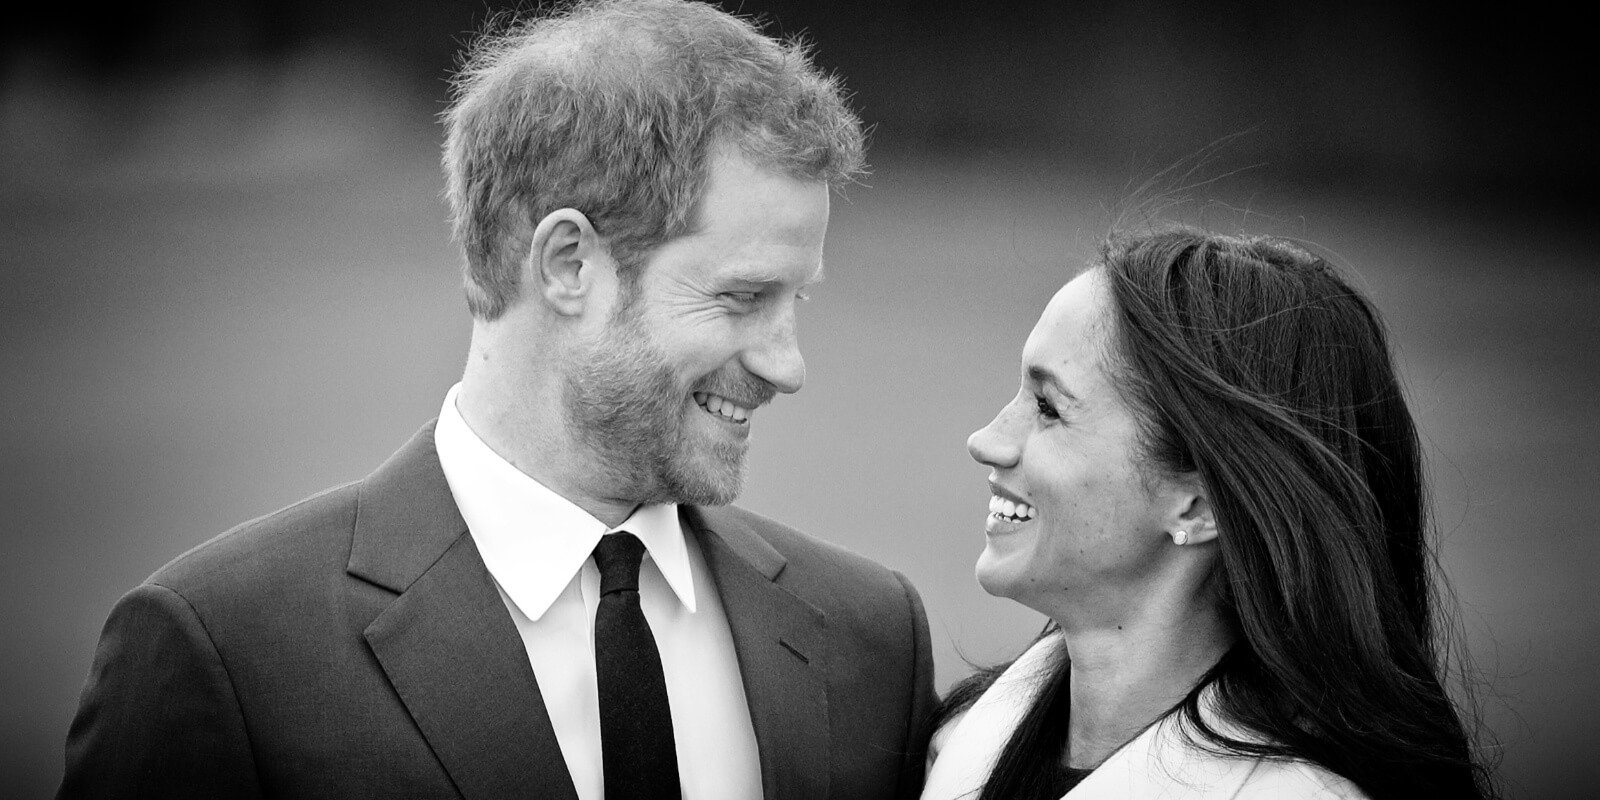 Prince Harry Clicked With Meghan Markle For 1 Key Reason Says Royal Biographer